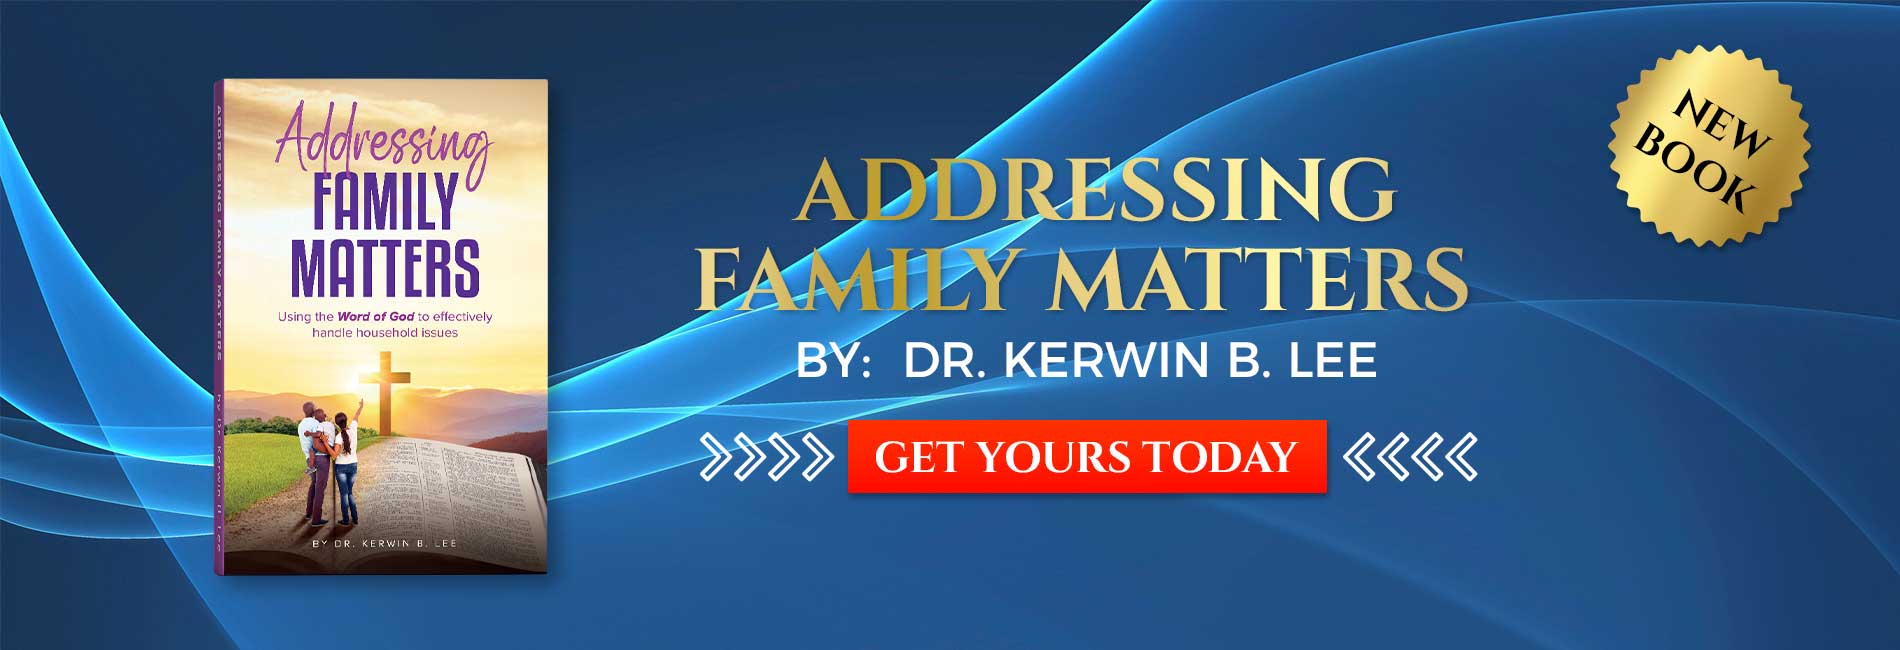 Dr Kerwin Lee Addressing Family Matters Book